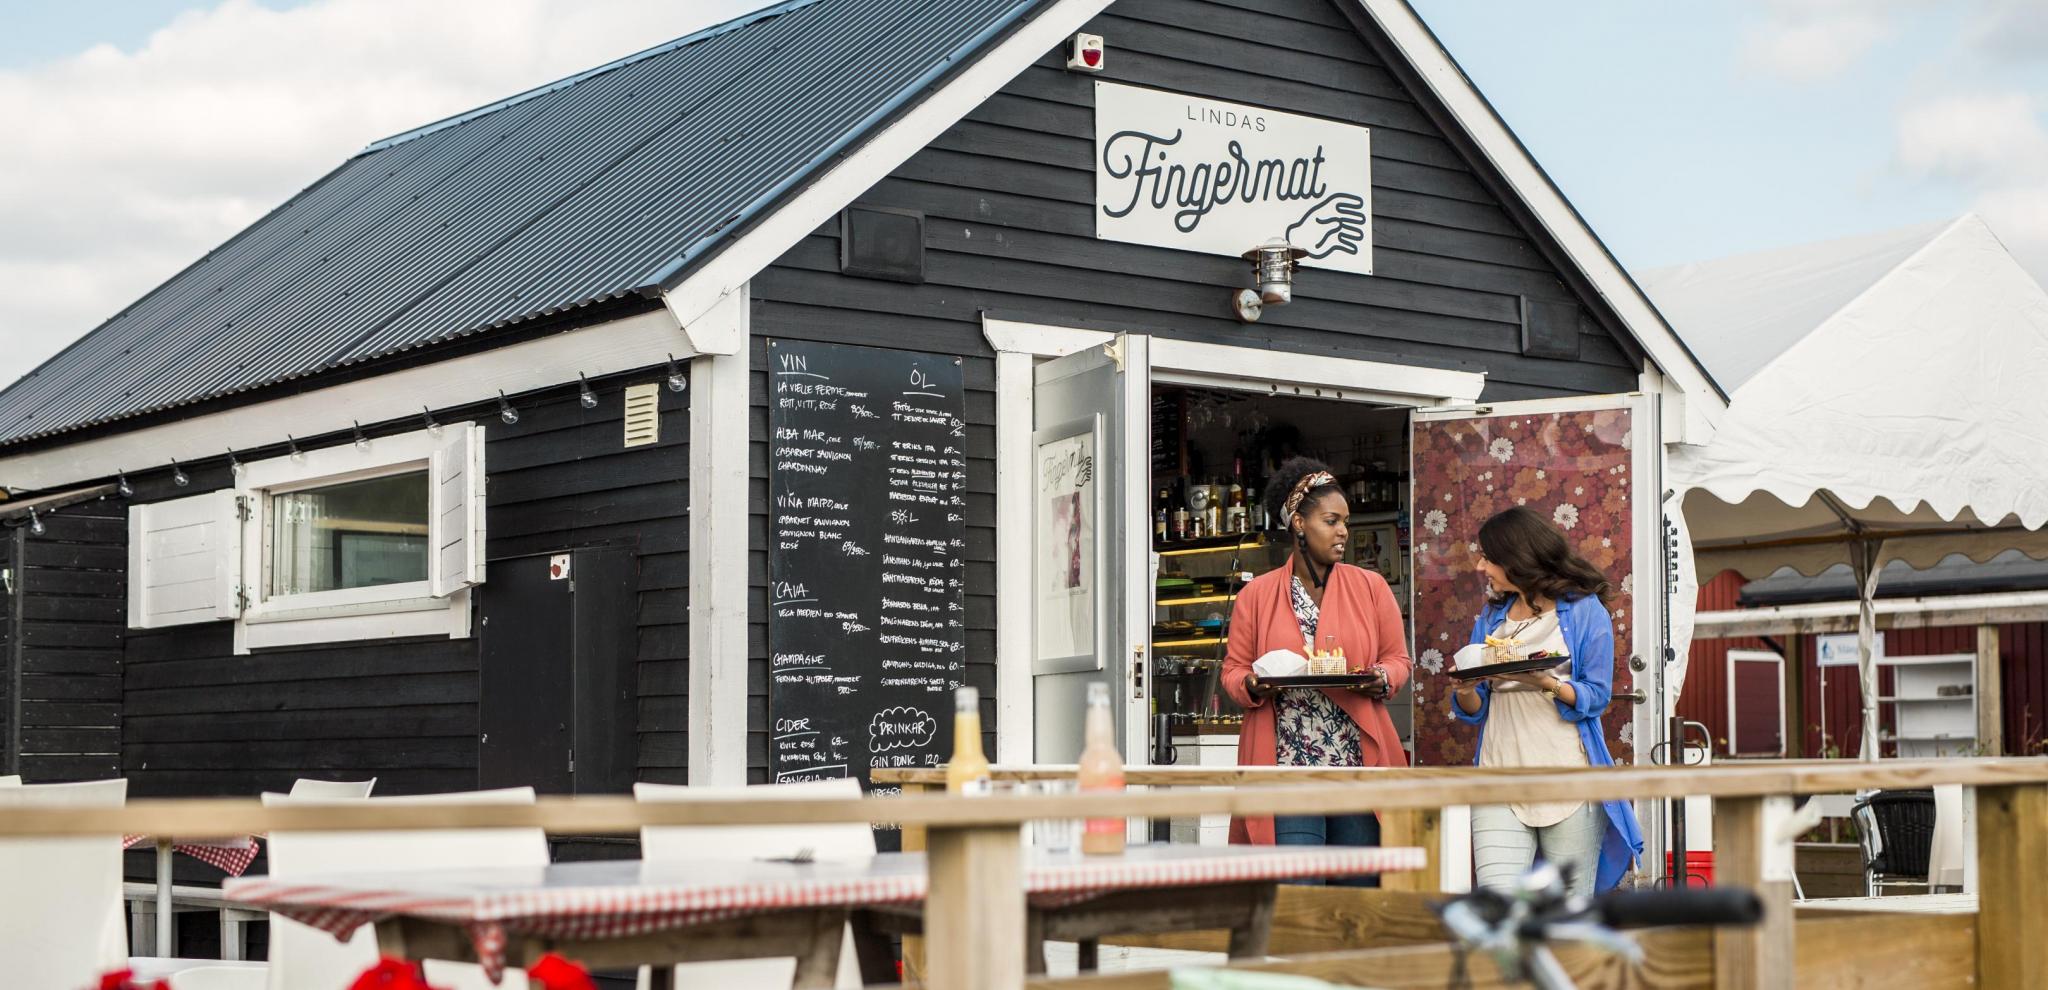 Two women that just bought food from a foodshed called Lindas fingermat.